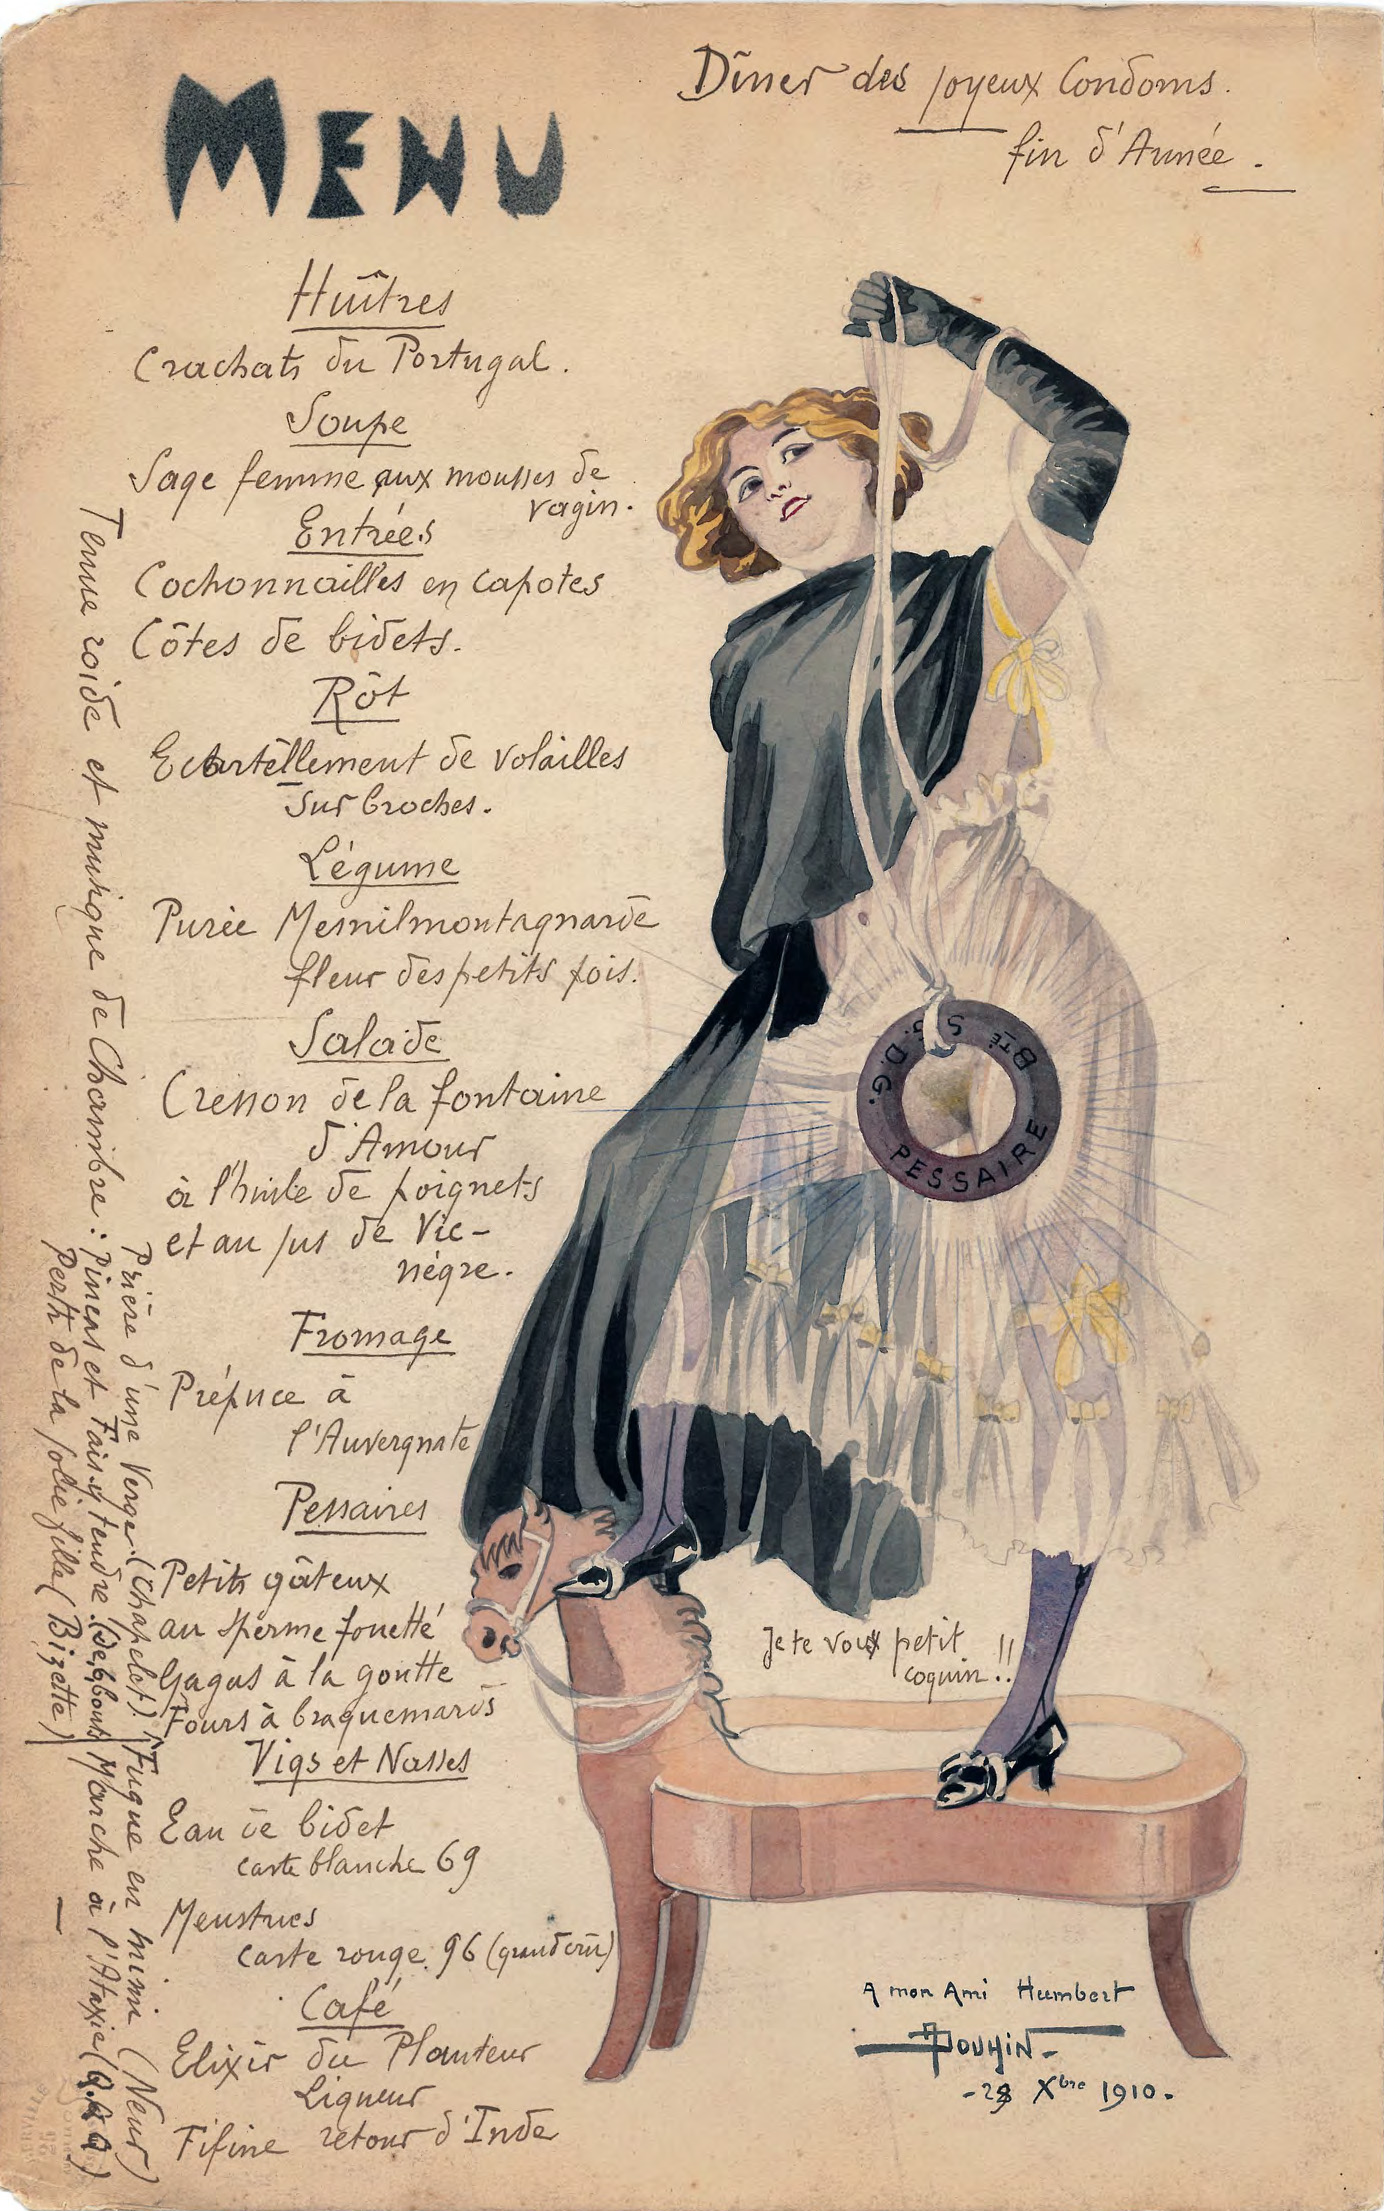 Menu drawn by André Douhin for the 'Dîner des joyeux Condoms', the New Year dinner of Eugène Humbert in 1911.